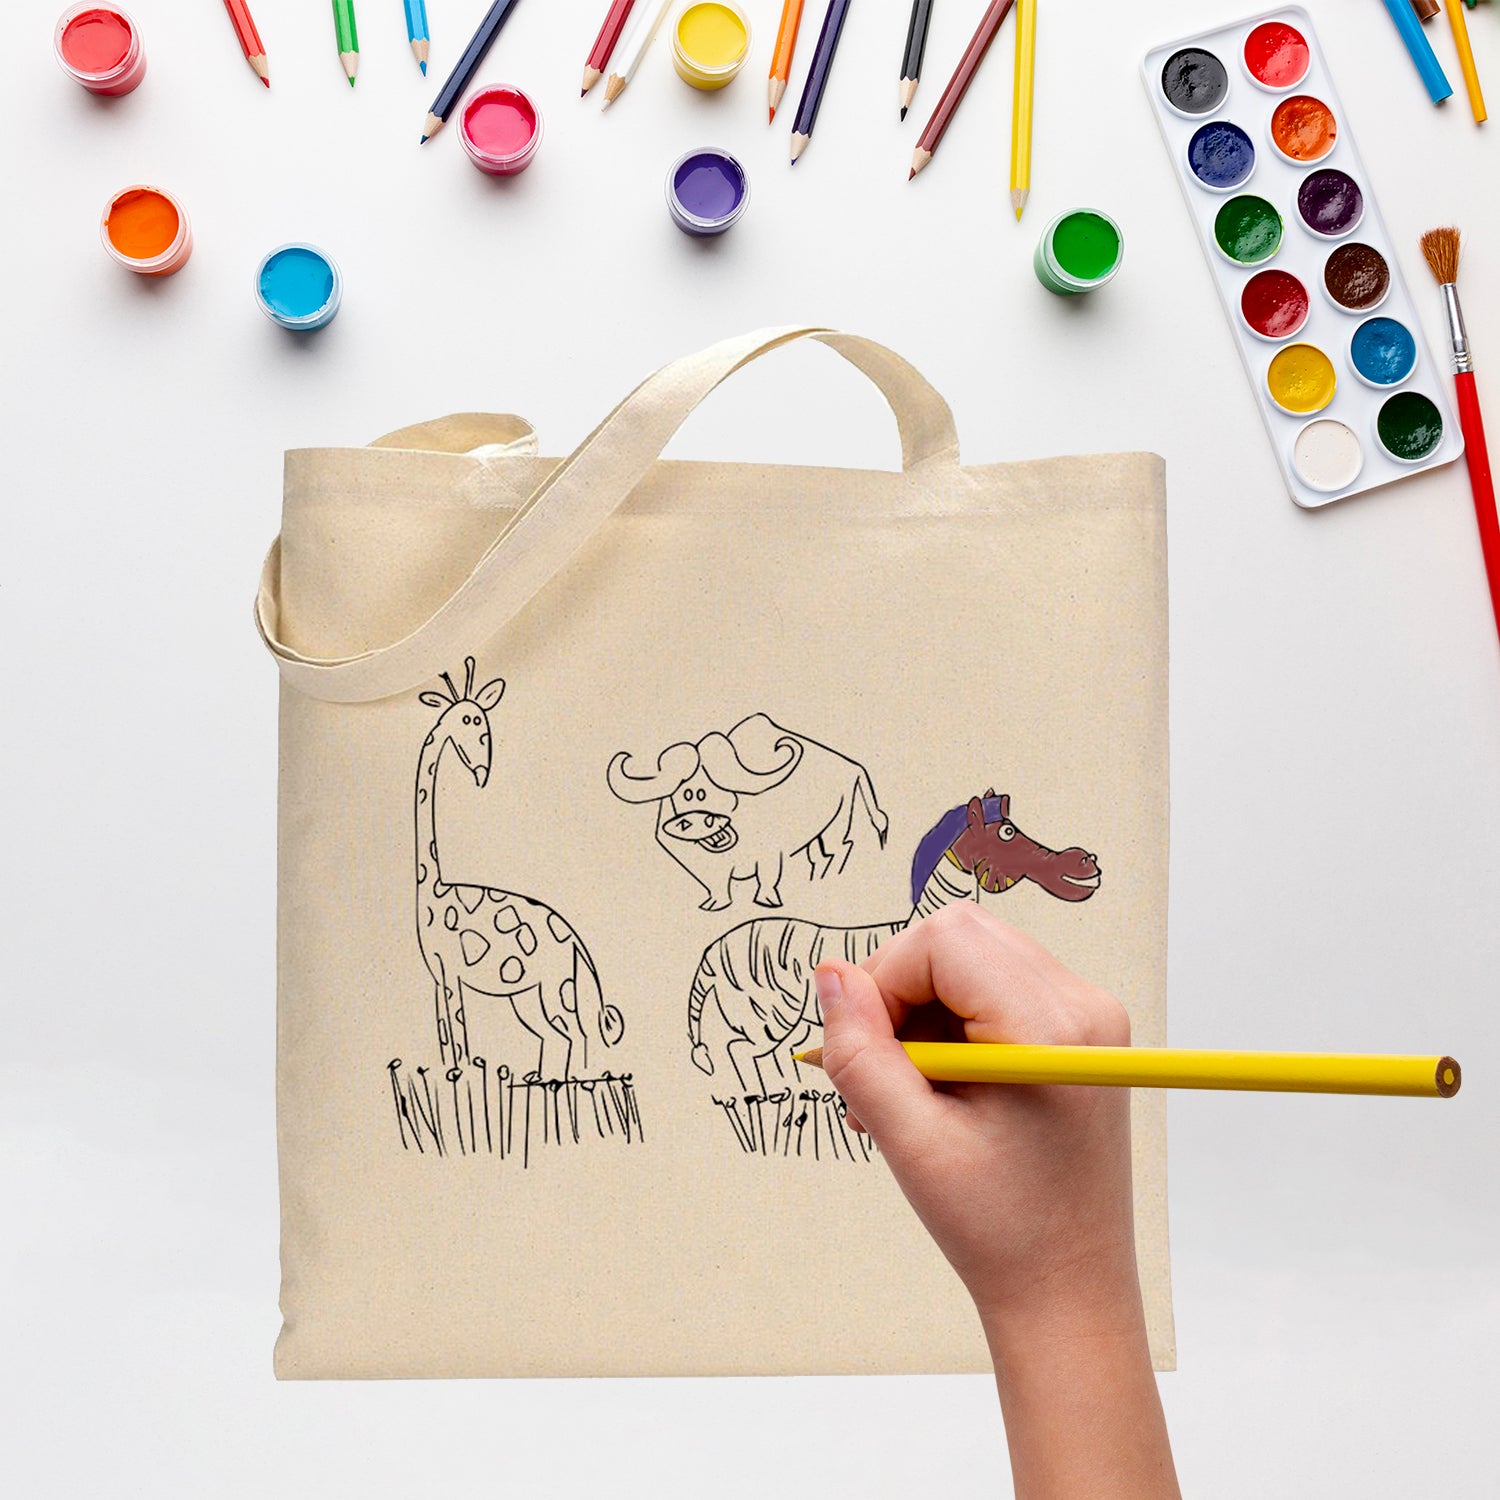 Coloring Goodie Bags with Watercolor Paint: 12 Pcs Animal Art Goodie Bags |  Cartoon Party Favor Tote Bags with Painting Brush for Kids : Amazon.in:  Toys & Games